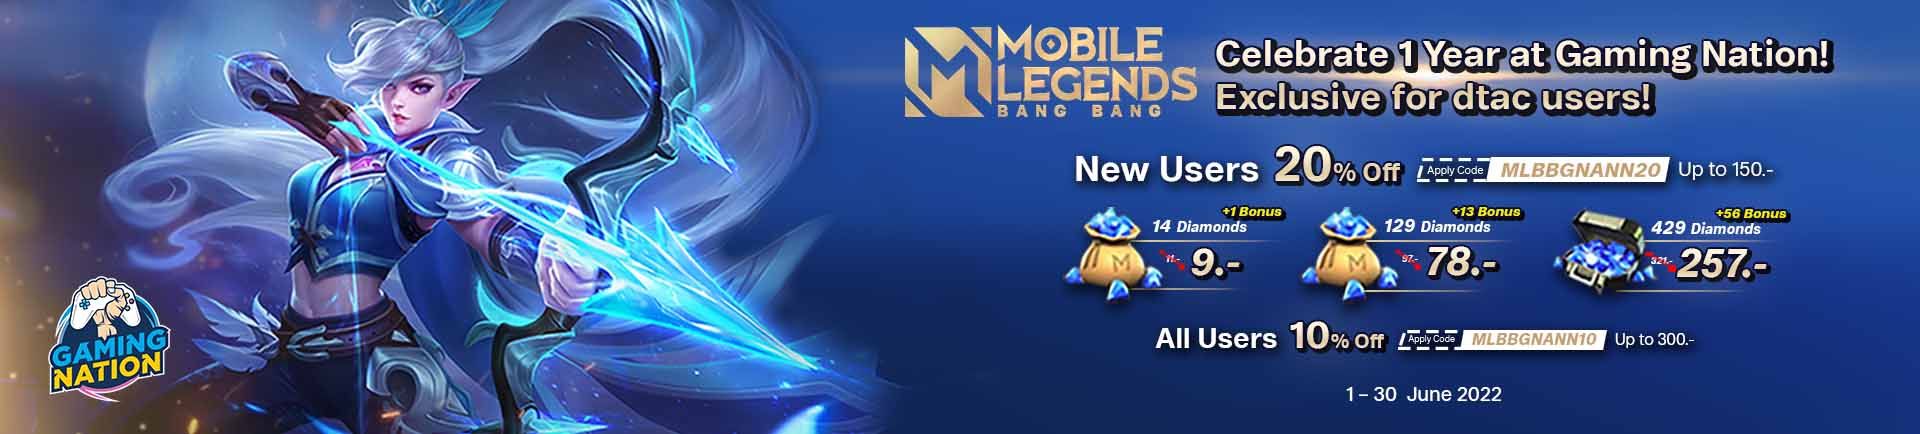 NEW! Top up Mobile Legends, get up to 20% discount!